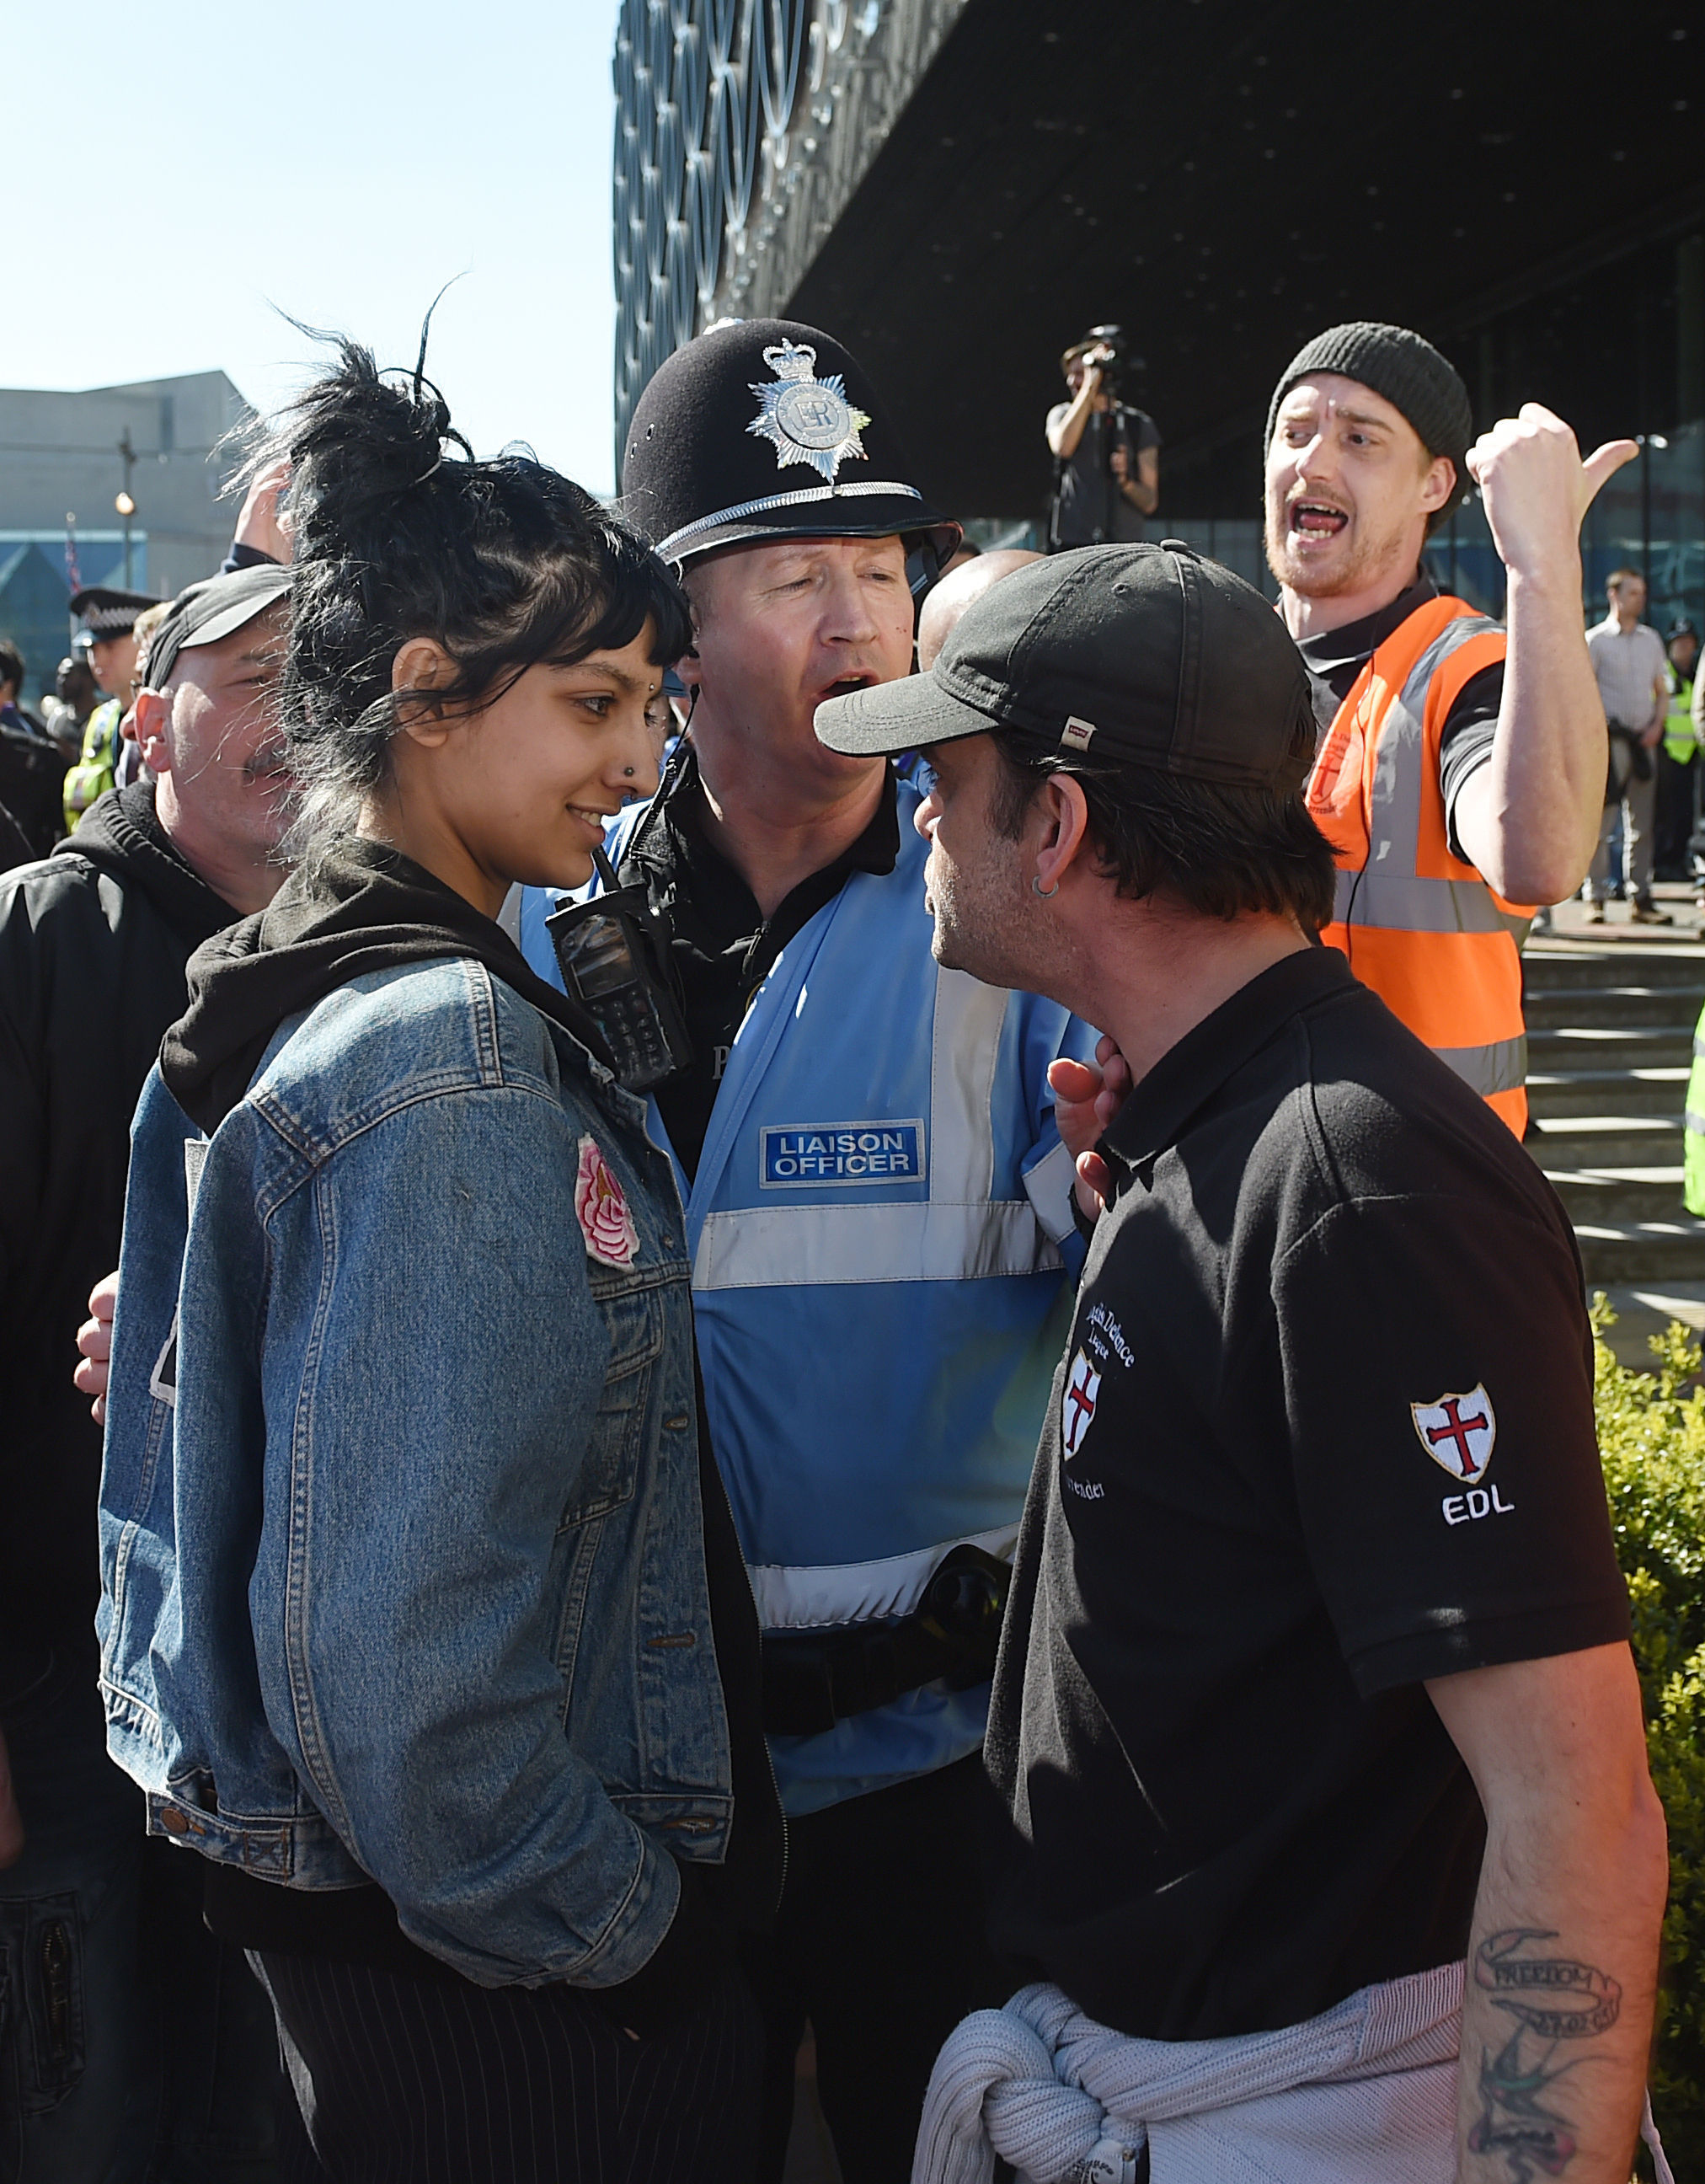 Saffiyah Khan, left, stars down English Defence League protester Ian Crossland during a demonstration in Birmingham, England, on April 10, 2017. (Joe Giddens—PA Wire/AP)